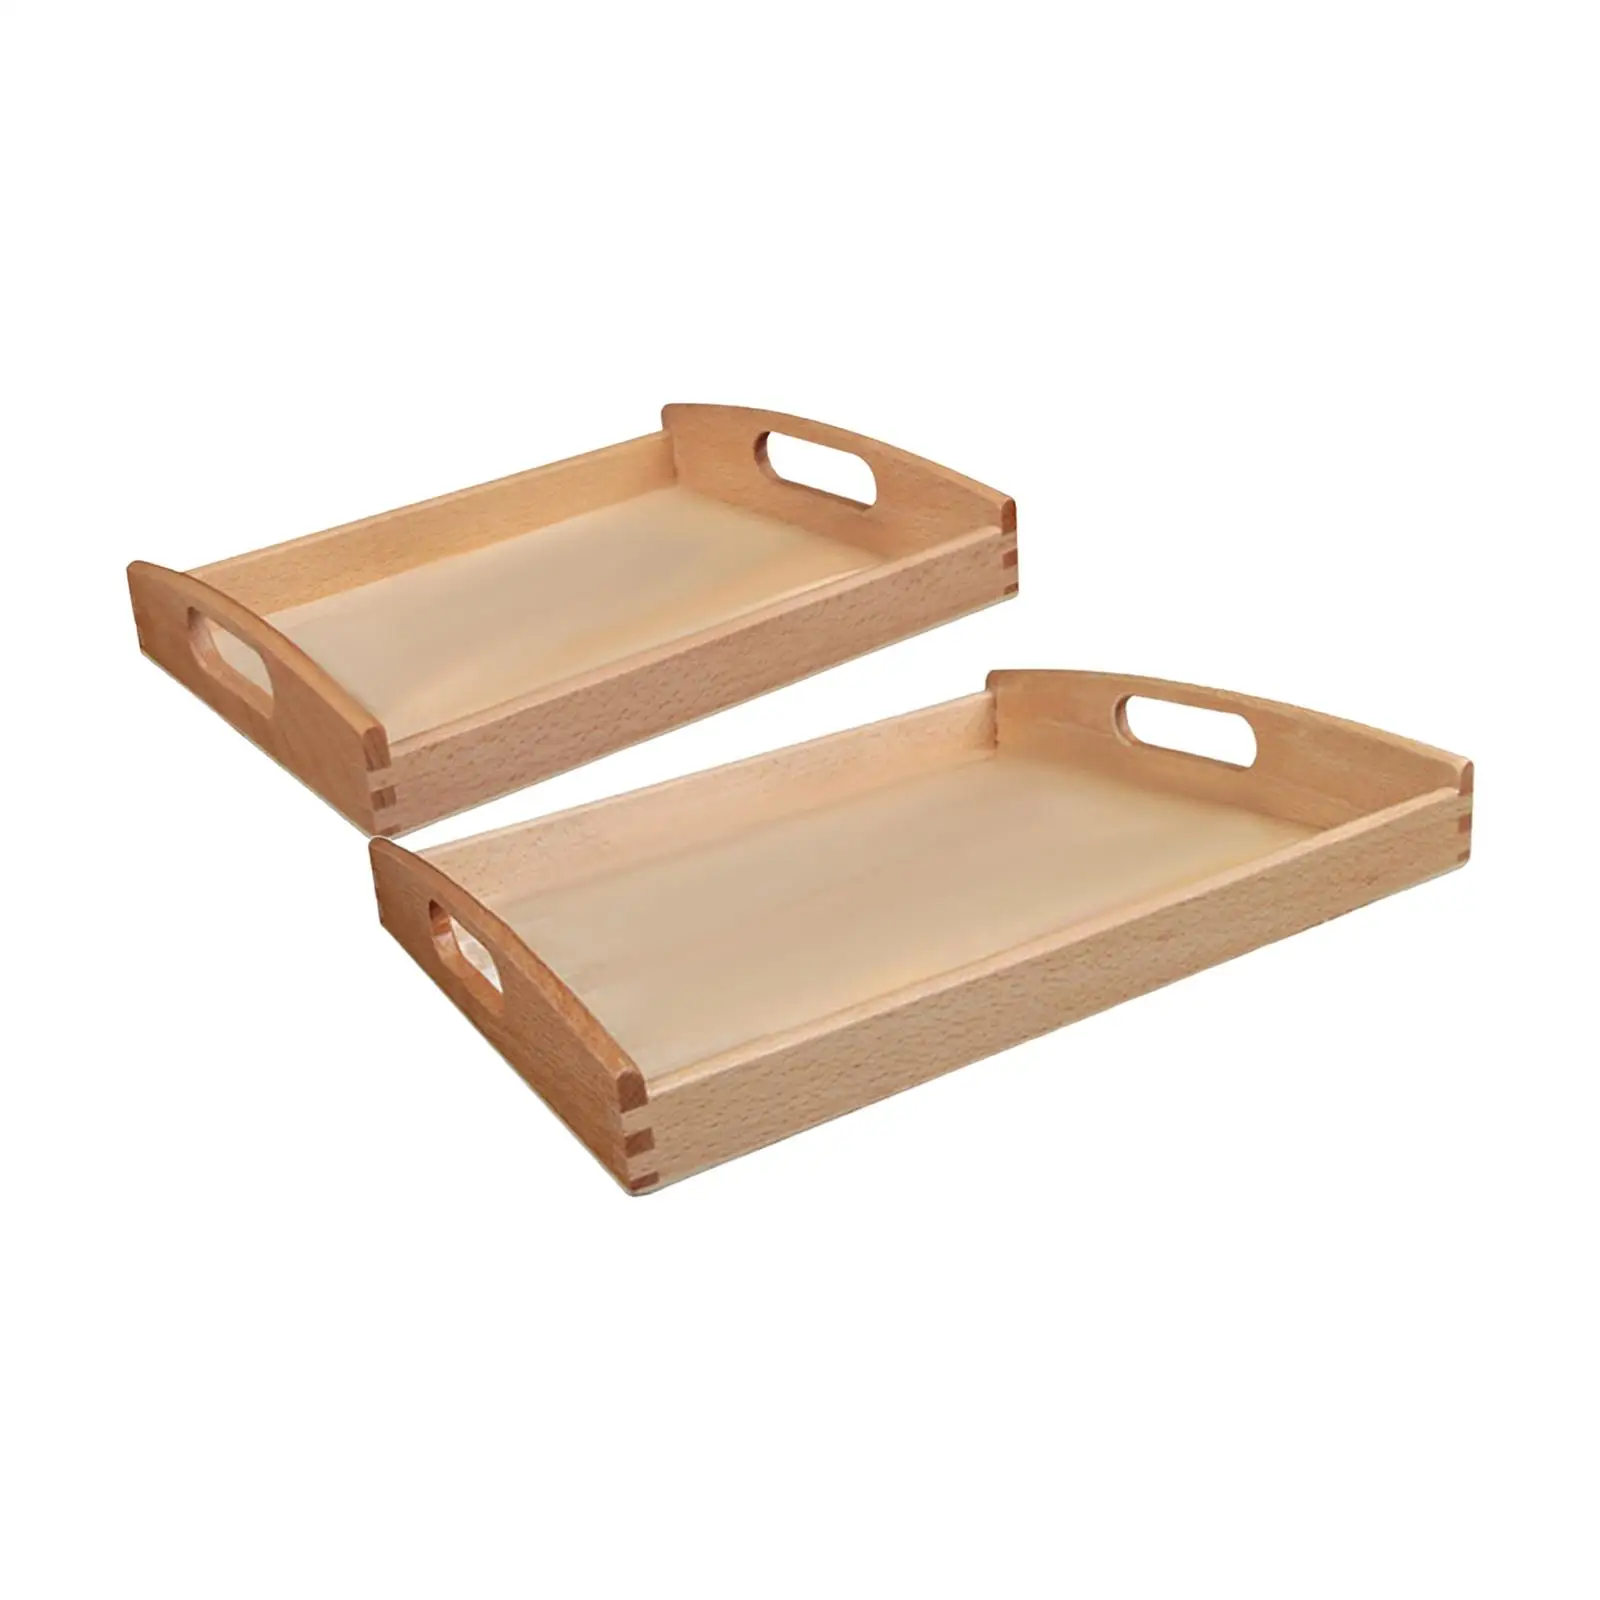 2pcs Wooden Montessori Materials with Handle Teaching Aids